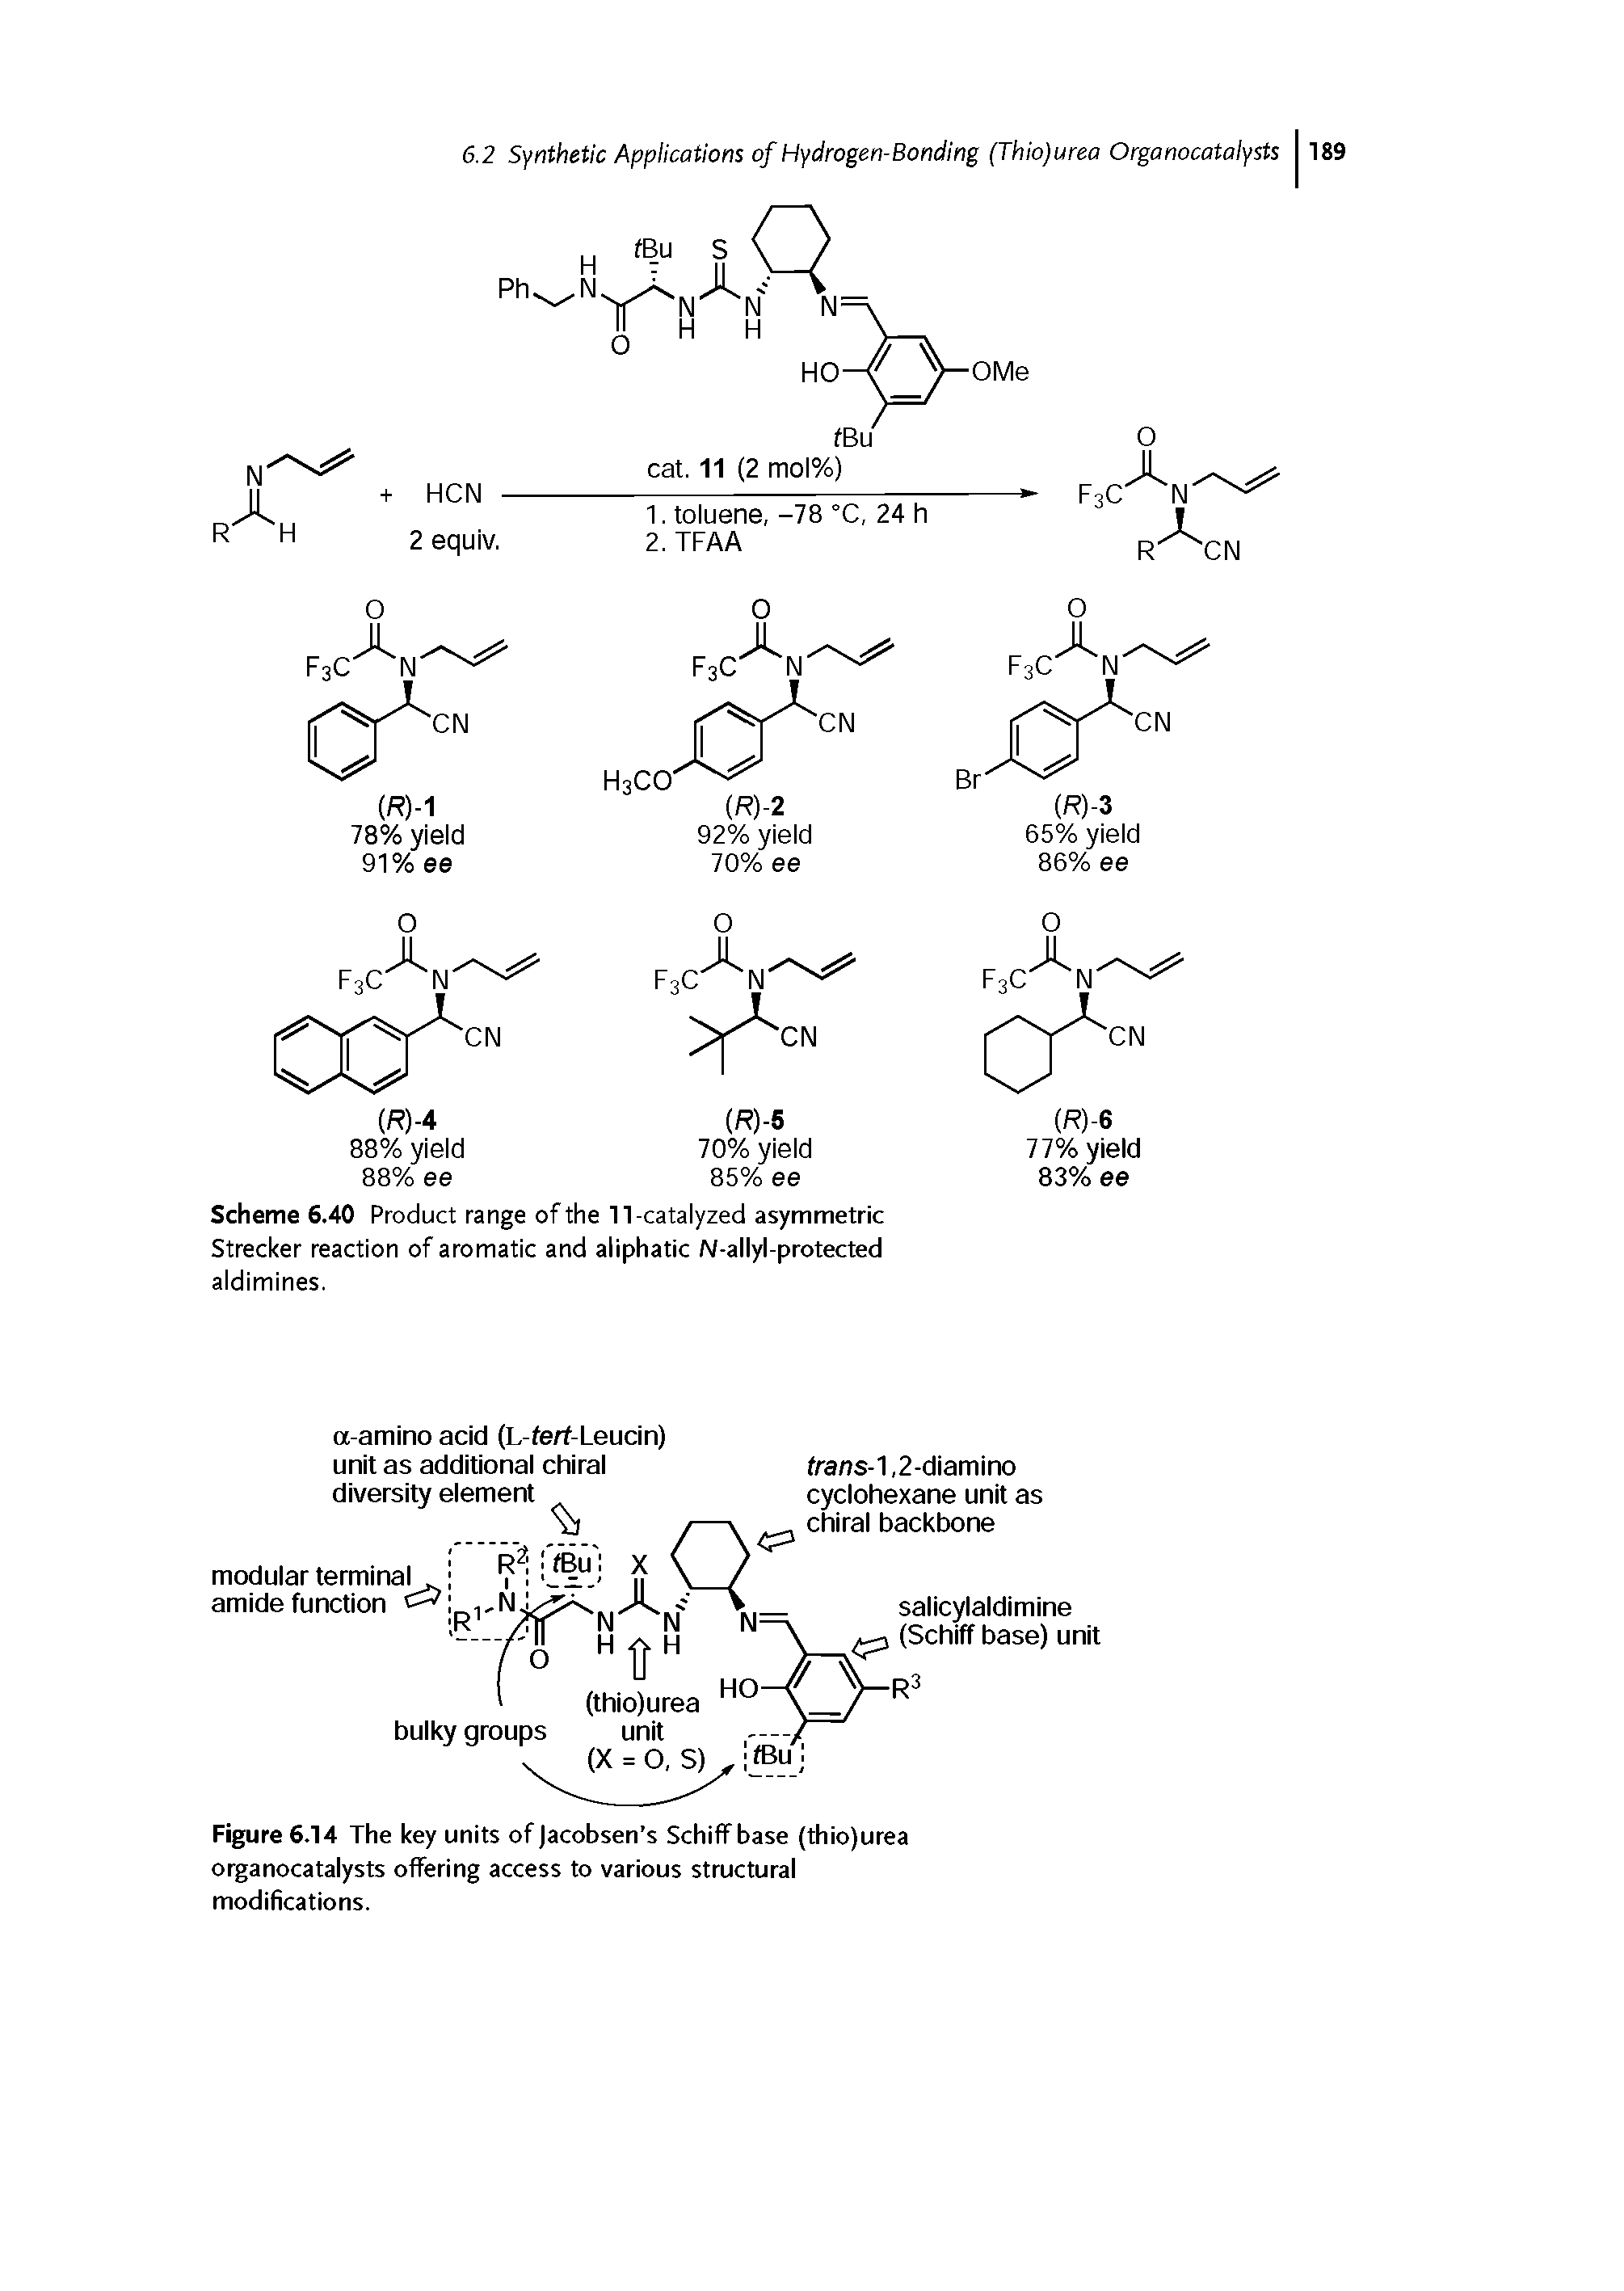 Scheme 6.40 Product range of the 11-catalyzed asymmetric Strecker reaction of aromatic and aliphatic N-allyl-protected aldimines.